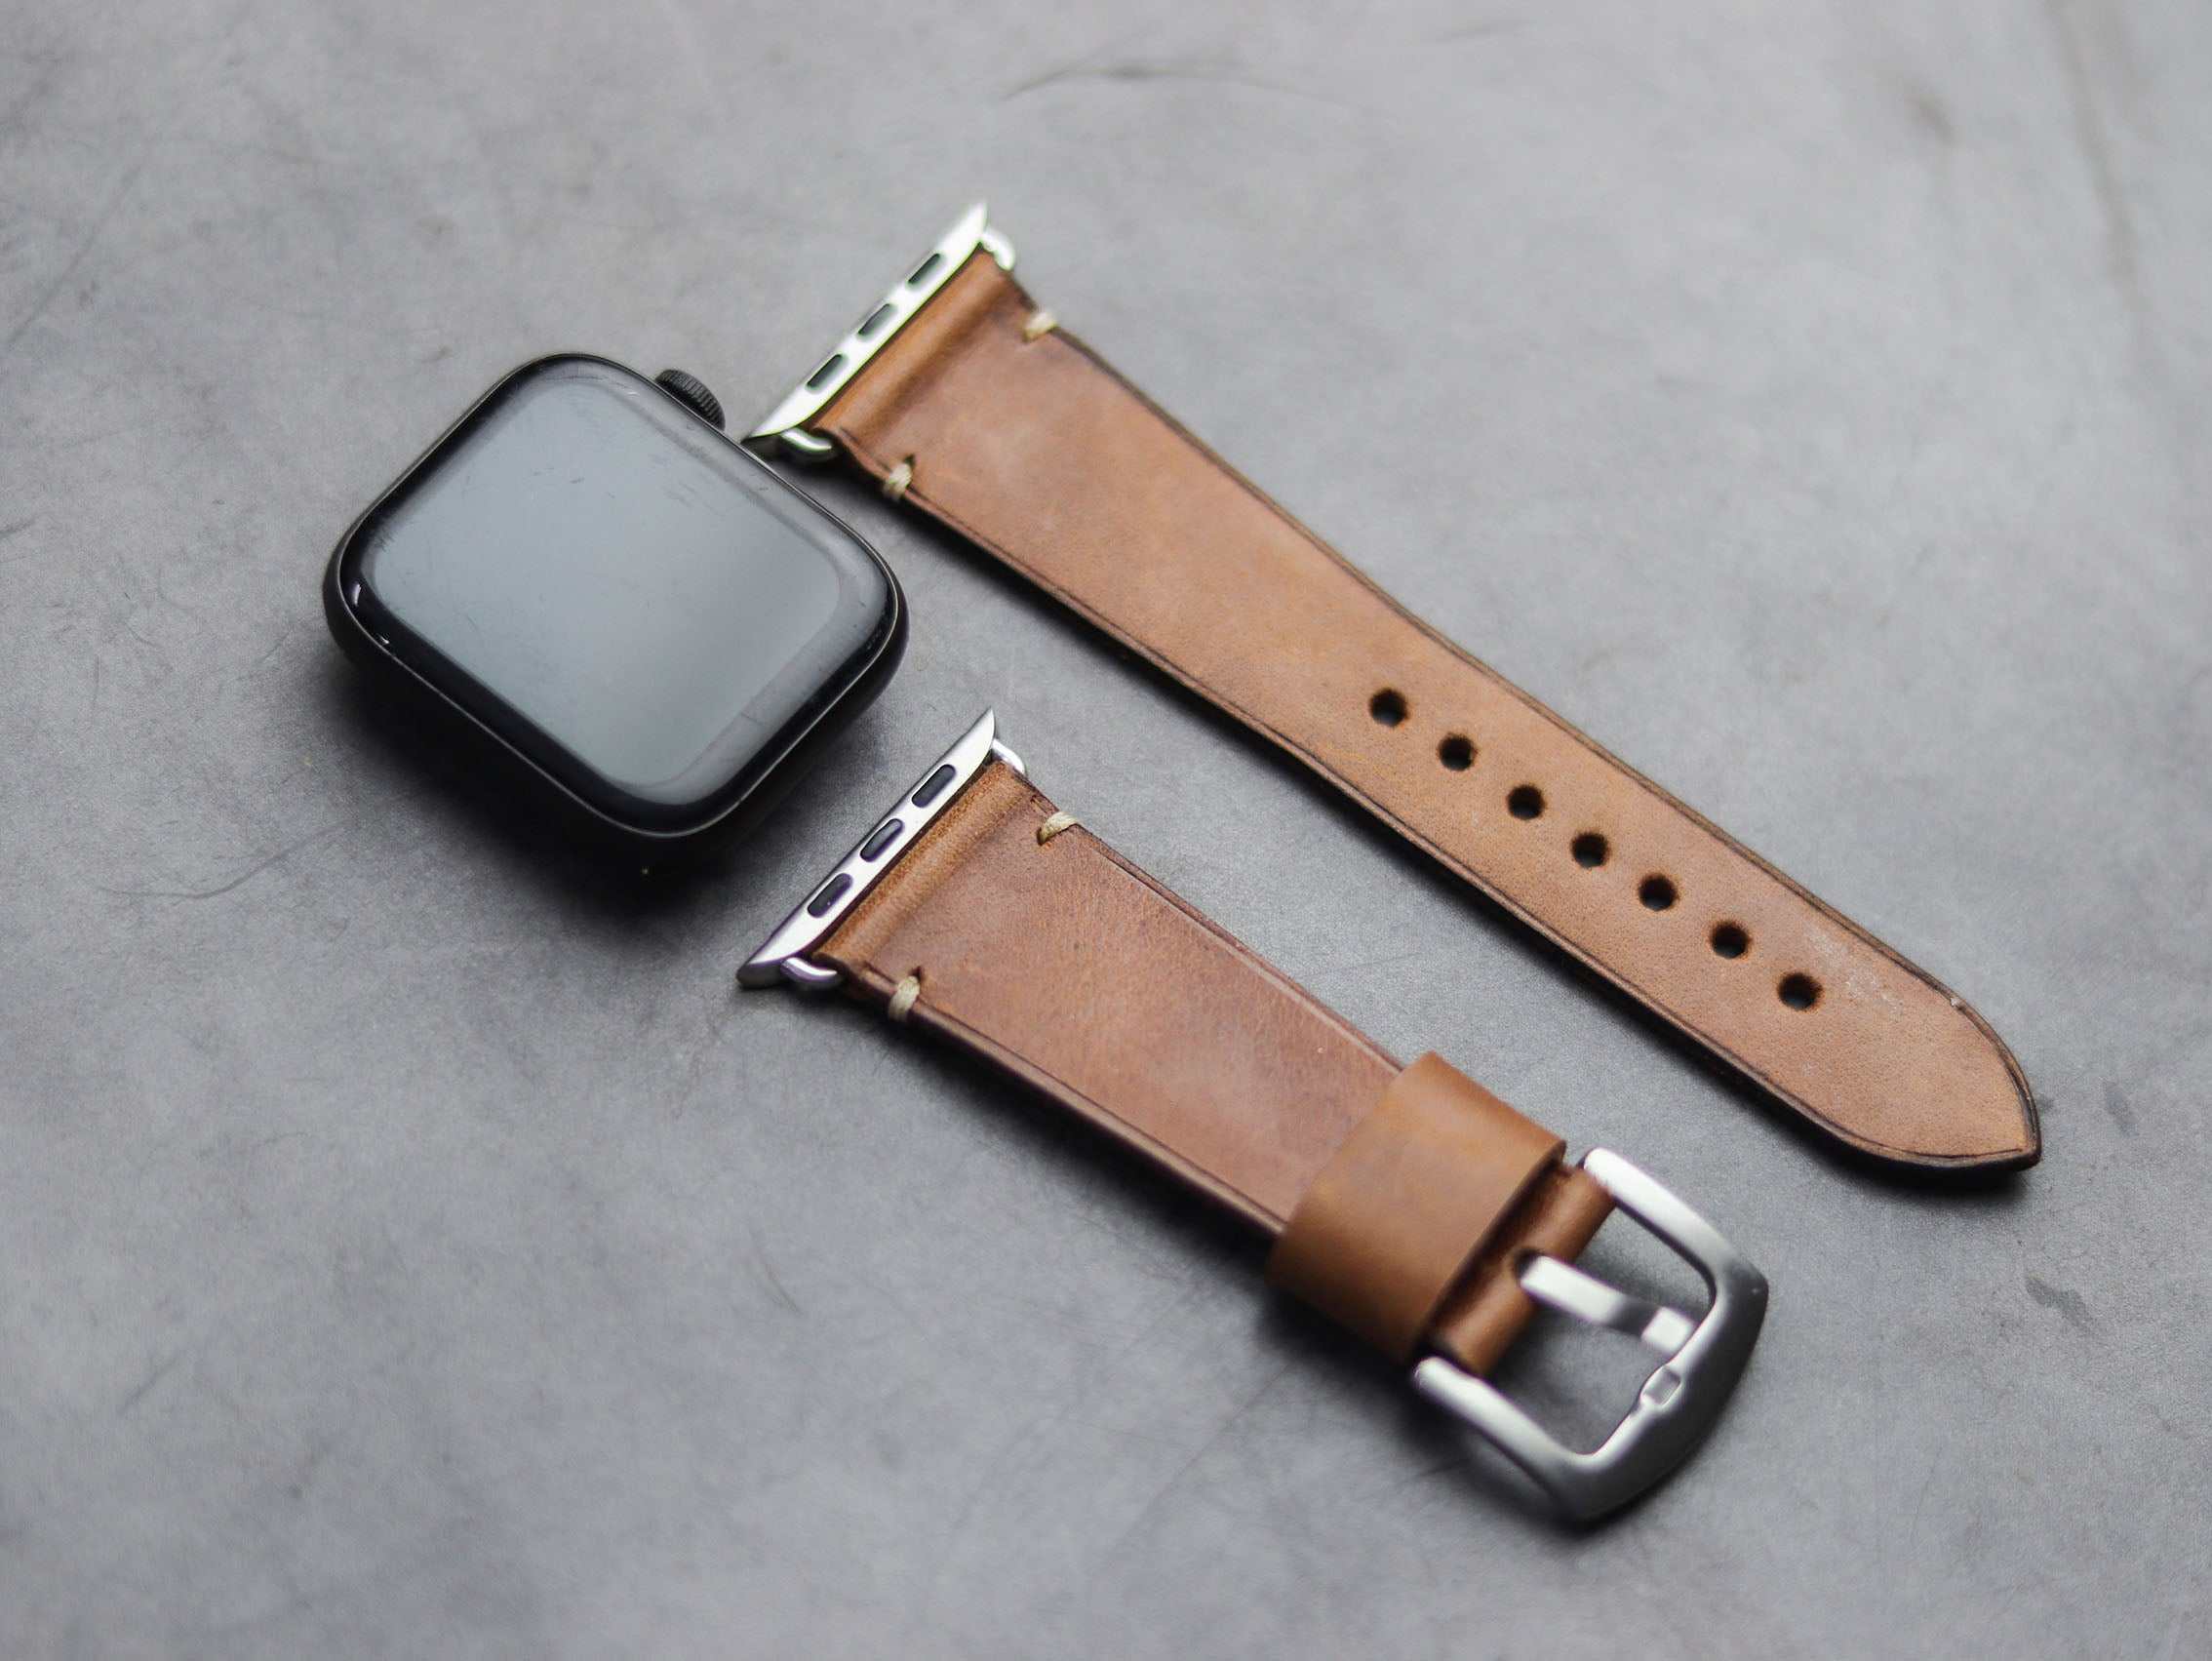 CARAMEL BROWN MINIMAL STITCHED HAND-CRAFTED APPLE WATCH STRAPS